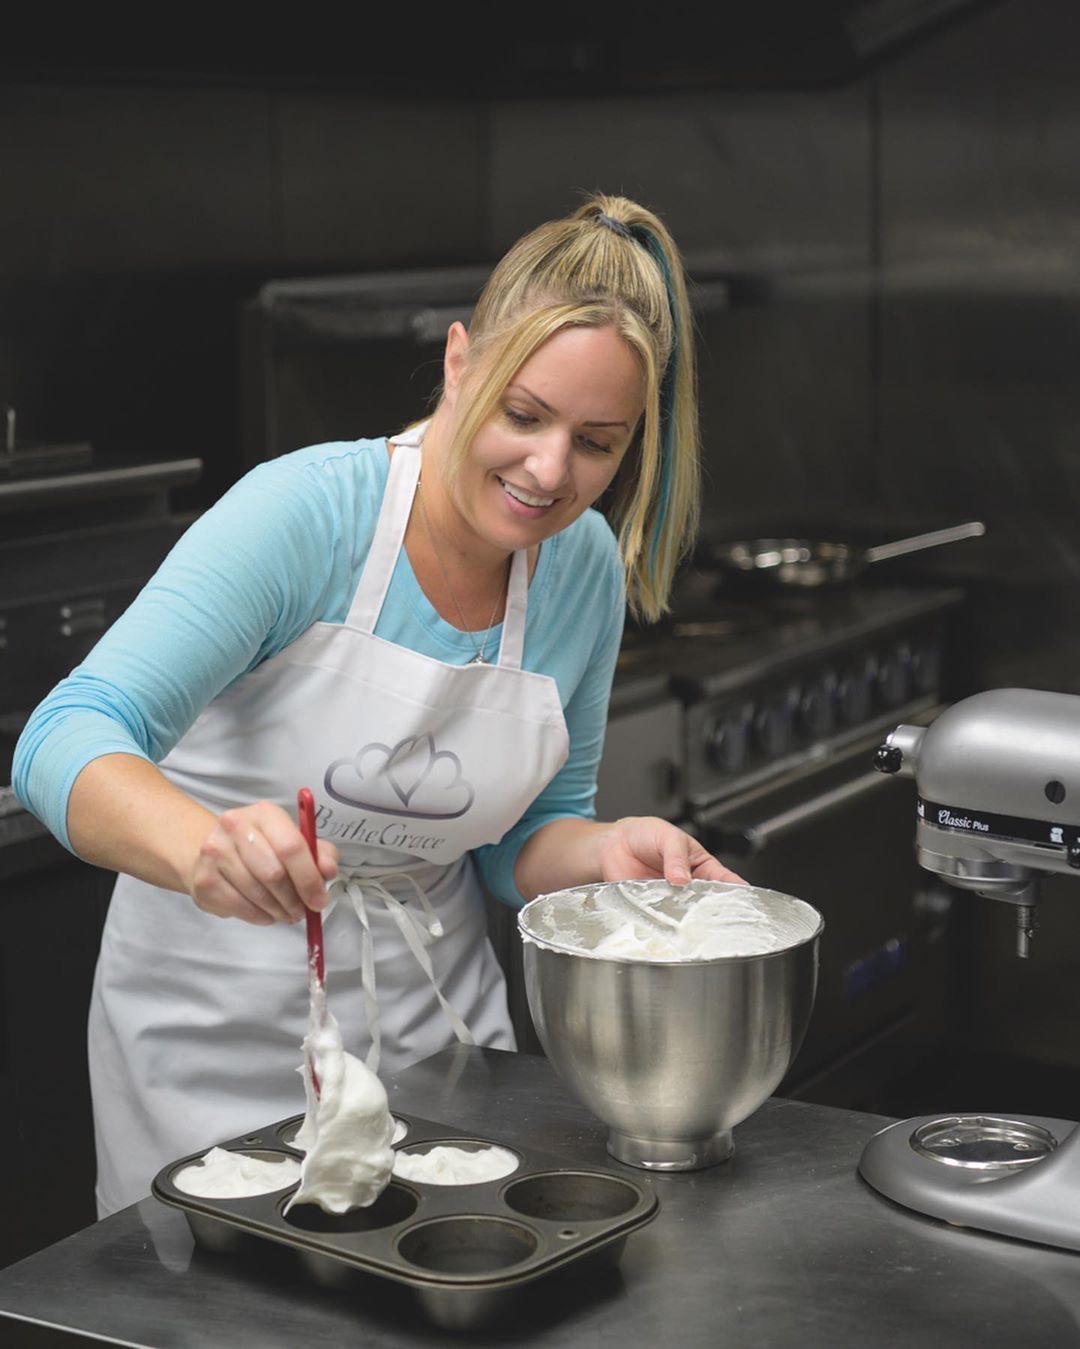 BytheGrace owner, Heather Stallings, cooking up their famous AngelCakes